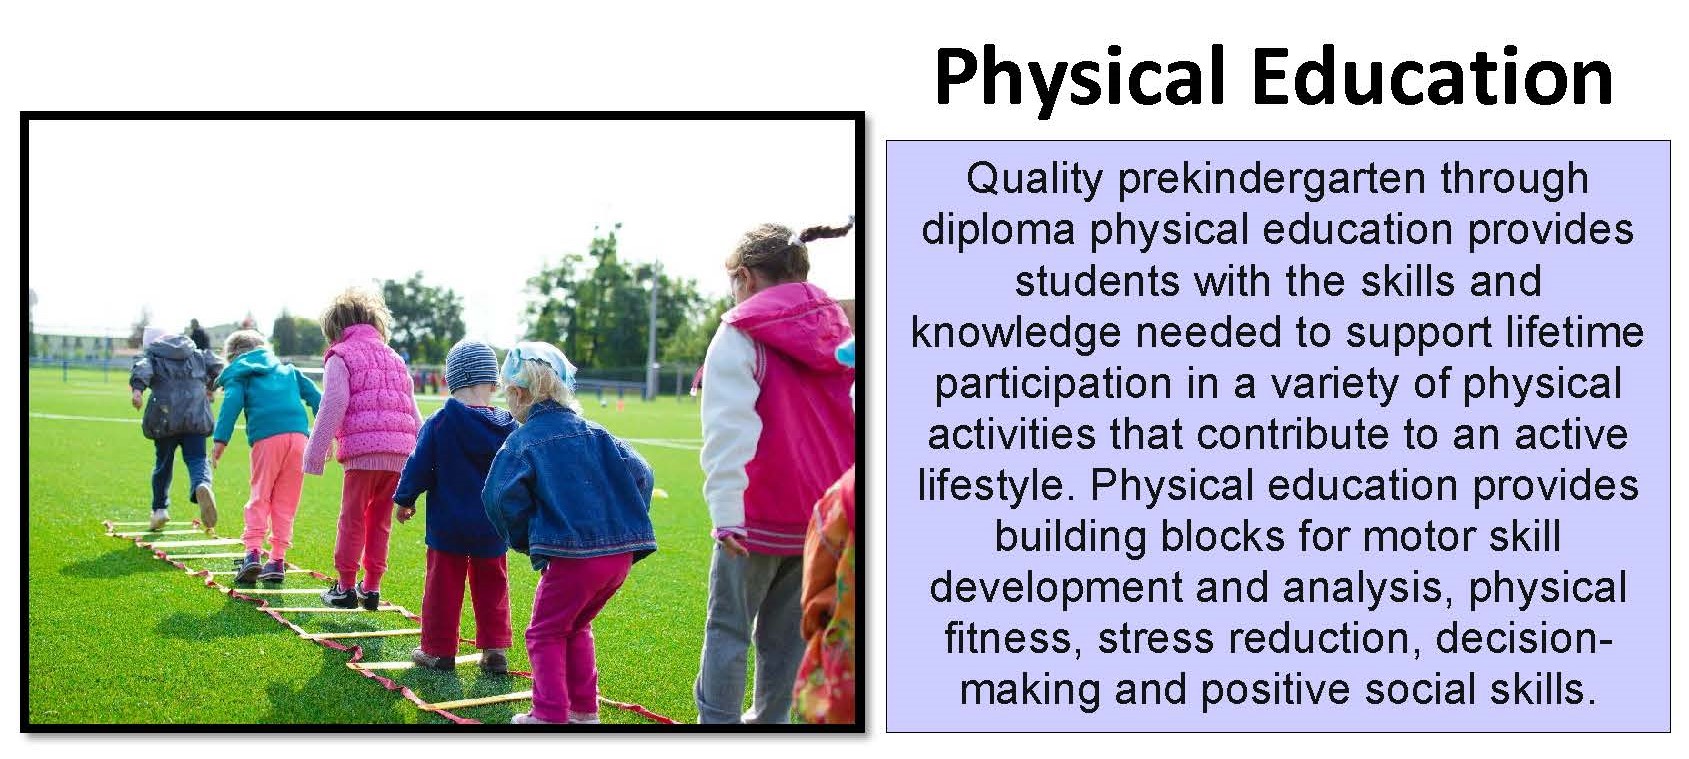 physical education related research topics